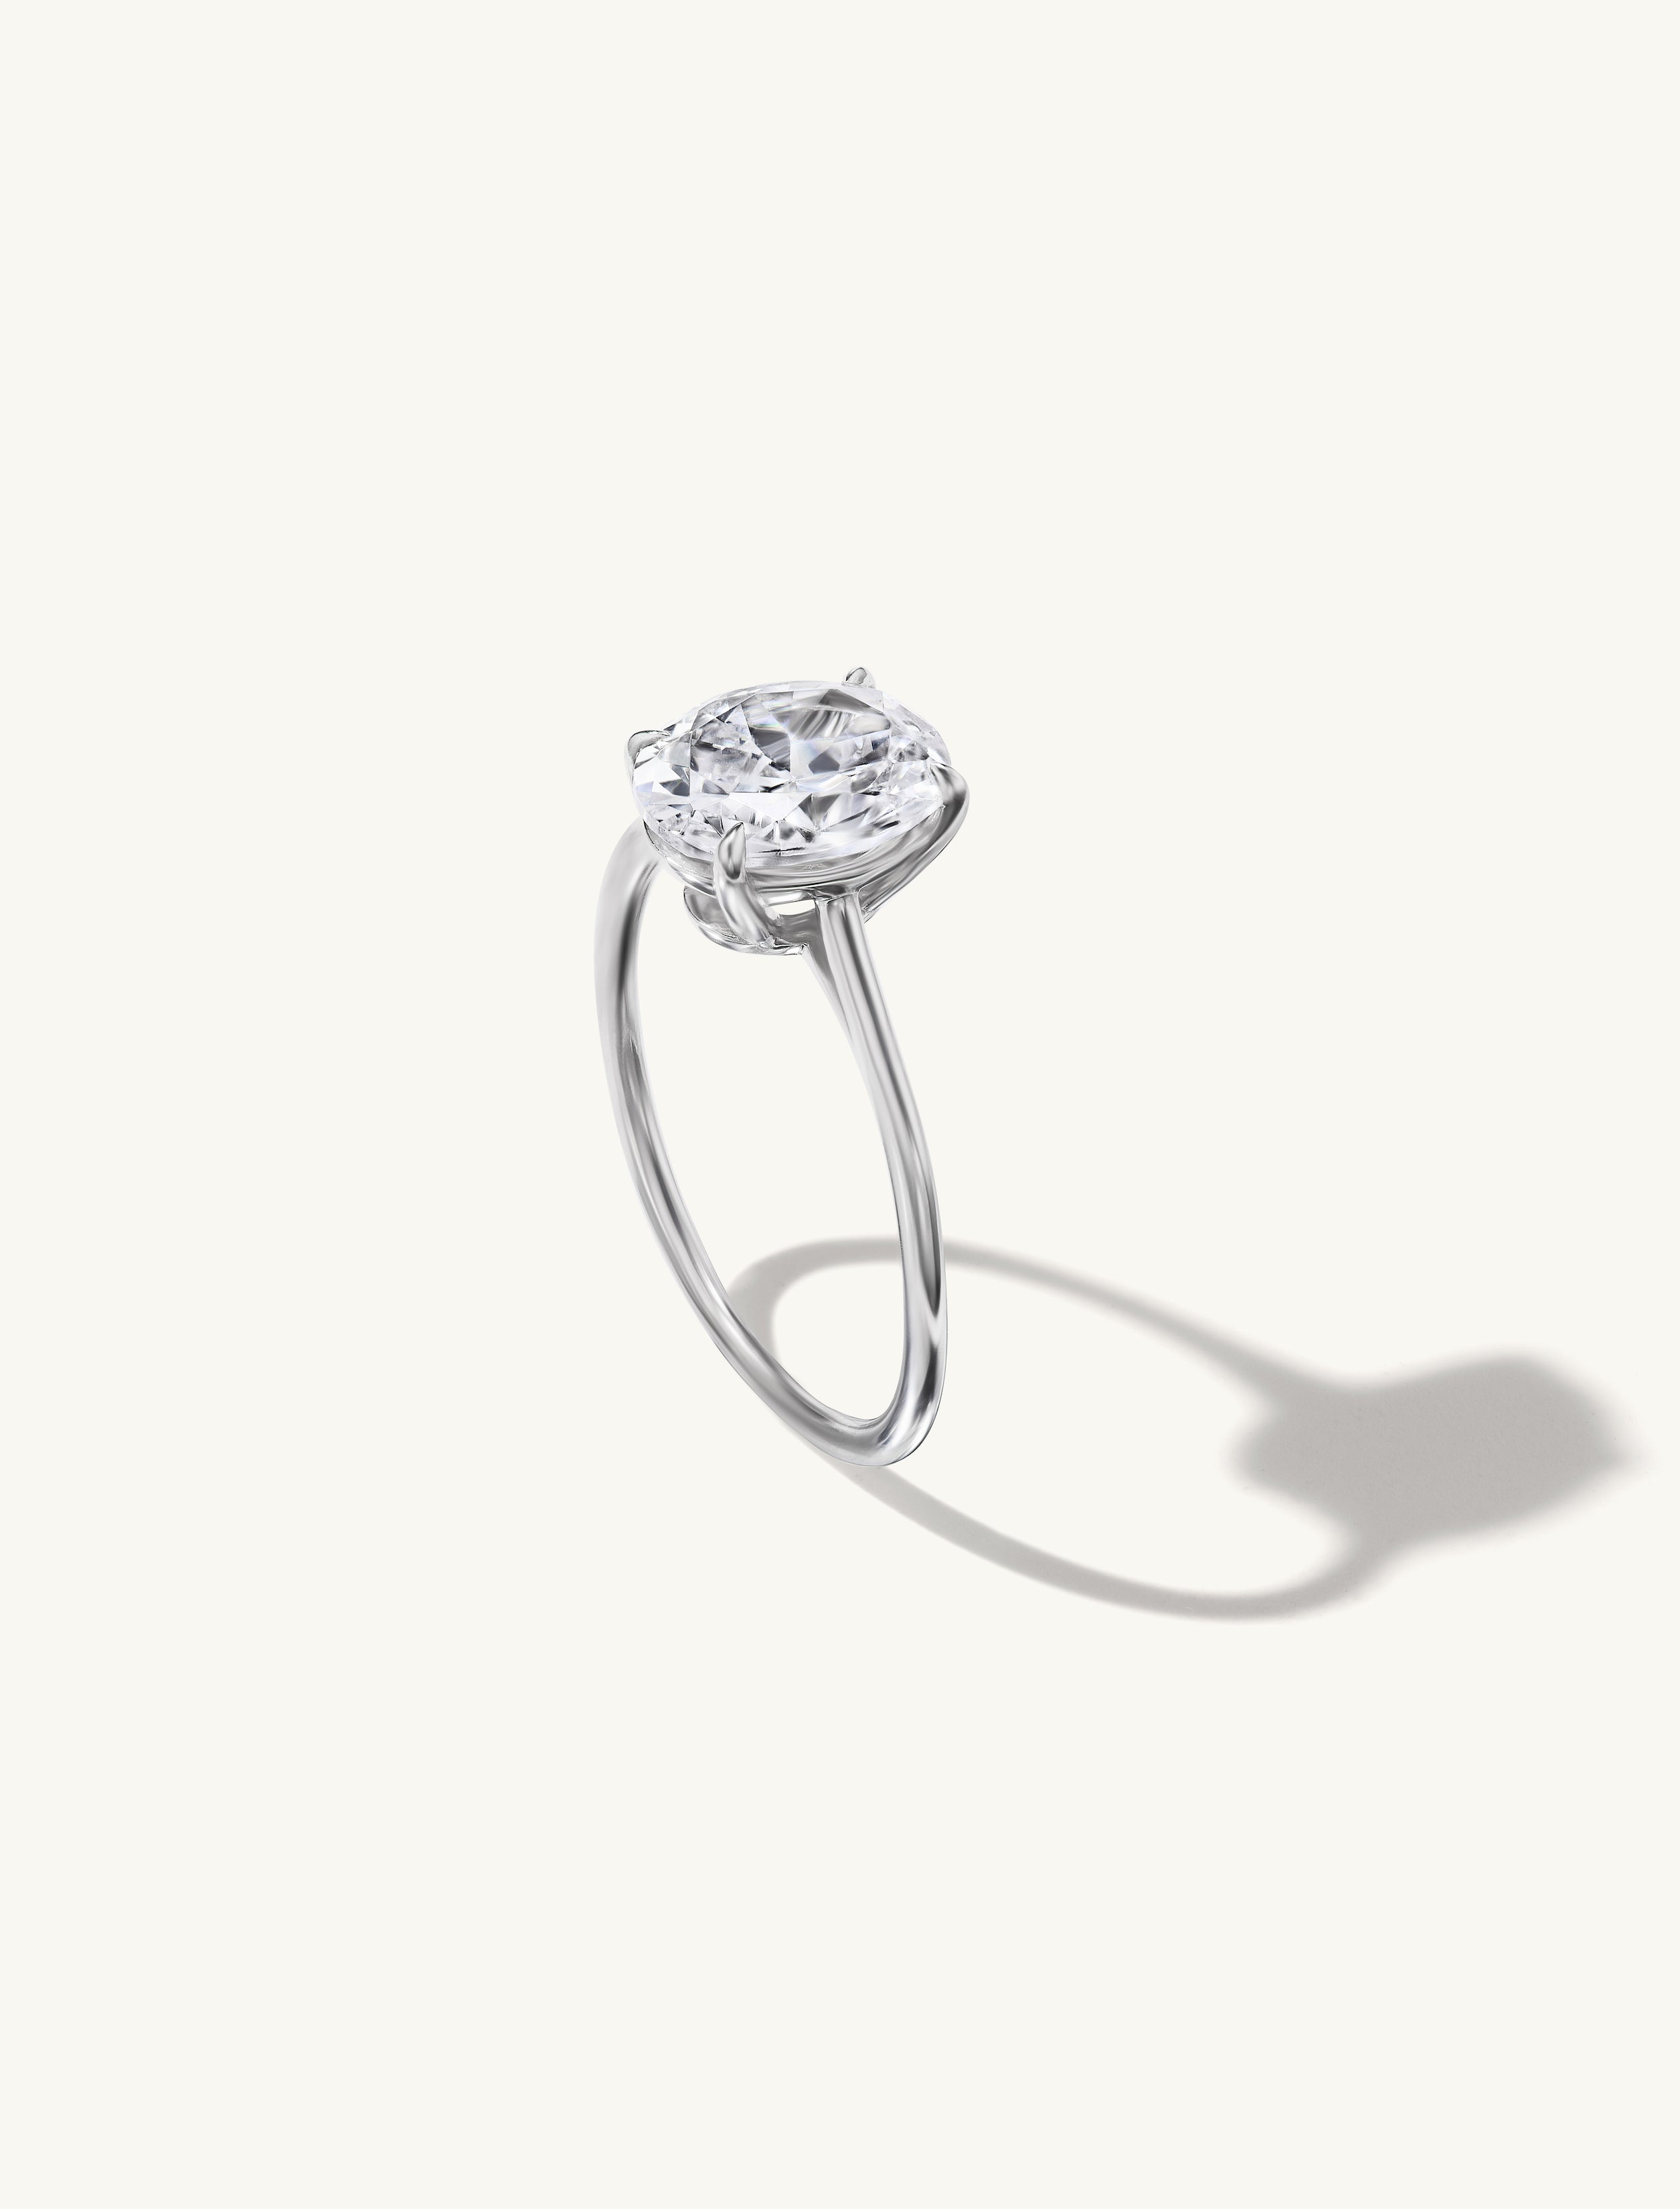 Floating Oval Engagement Try-On Ring